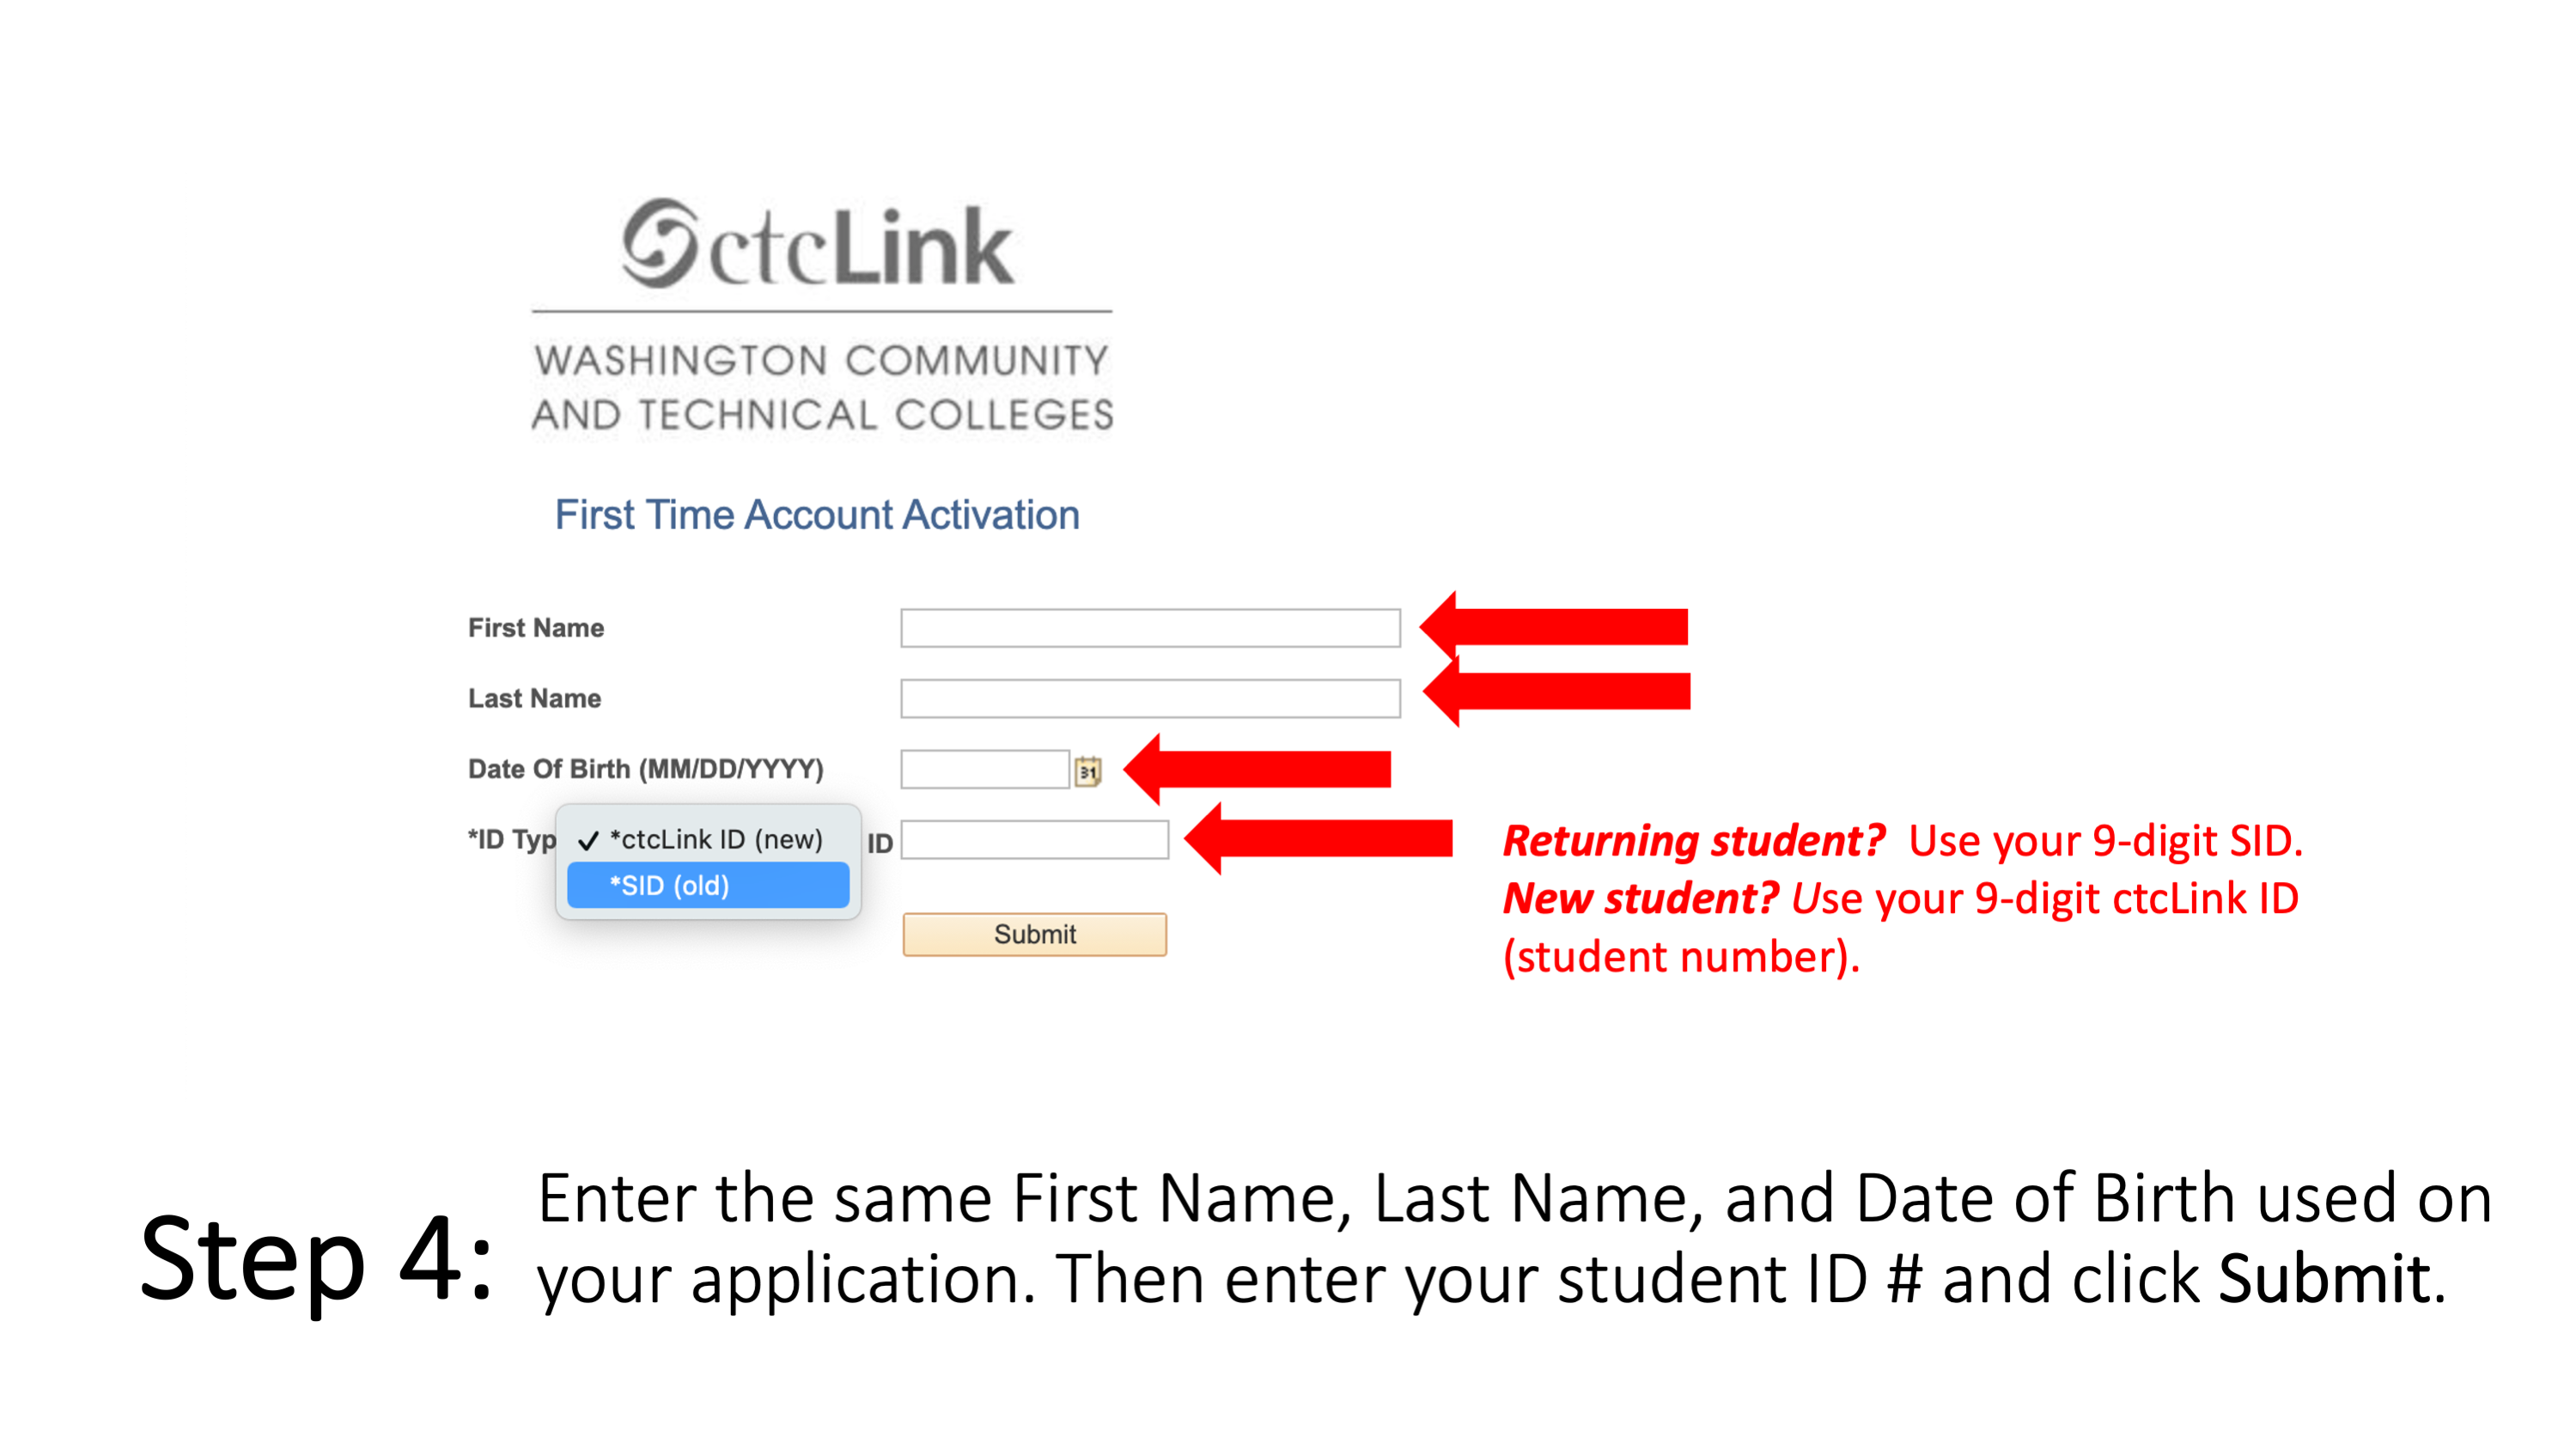 Step 4: Enter the same First Name, Last Name, and Date of Birth used on your application. Then enter your student ID # and click Submit. Use your 9-digit SID. New student? Use your 9-digit ctcLink ID (student number). 